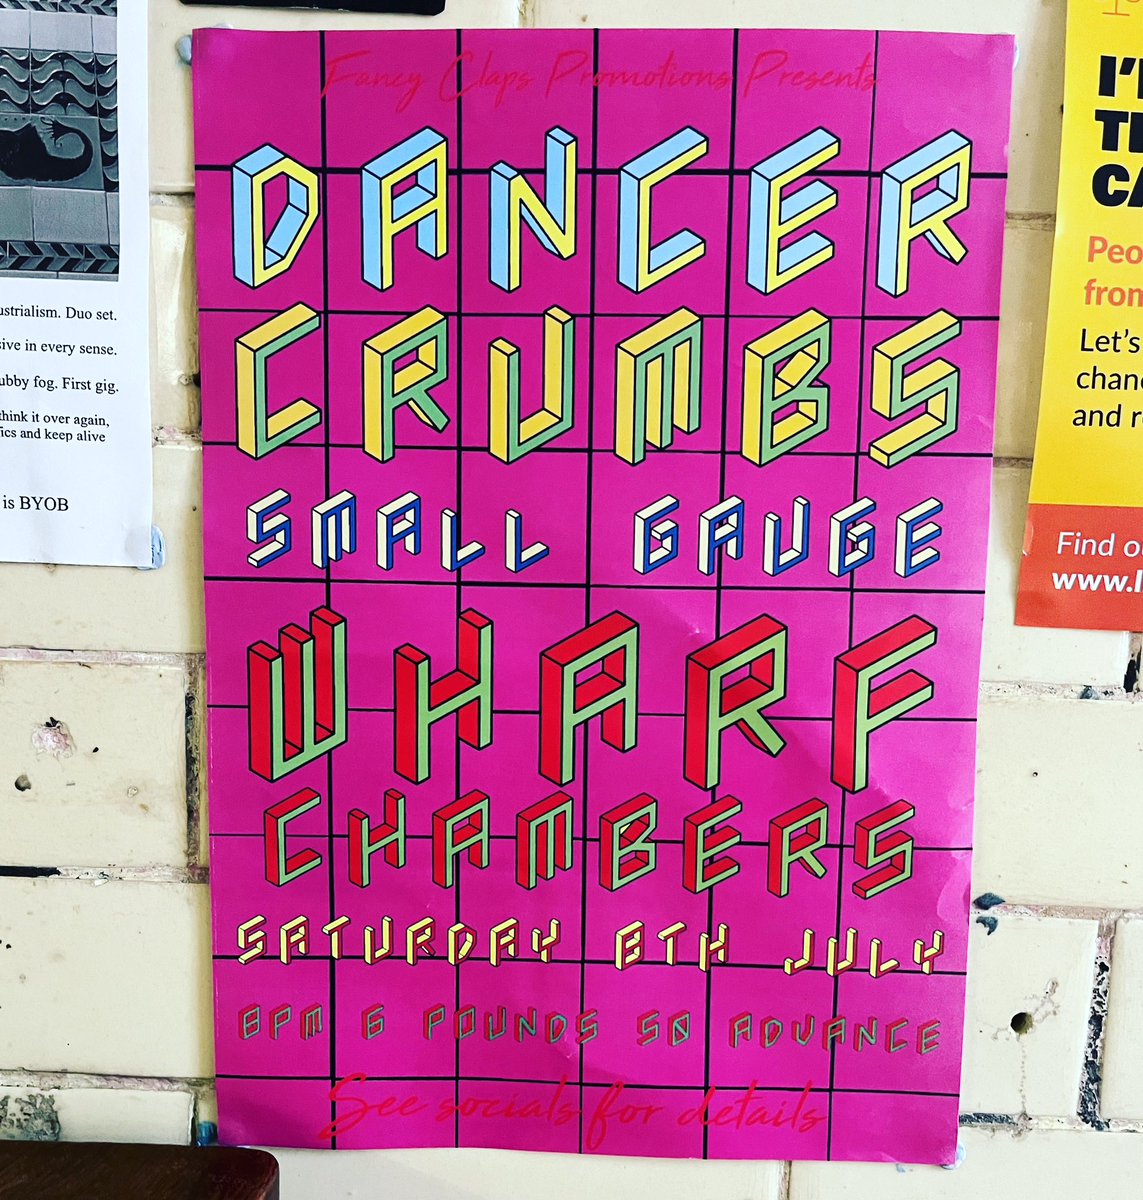 🩷 THIS SATURDAY! 🩷 Come see @Dancerareaband @crumbsband and Small Gauge at @WharfChambersCC yeah? wegottickets.com/event/581307 facebook.com/events/s/dance…